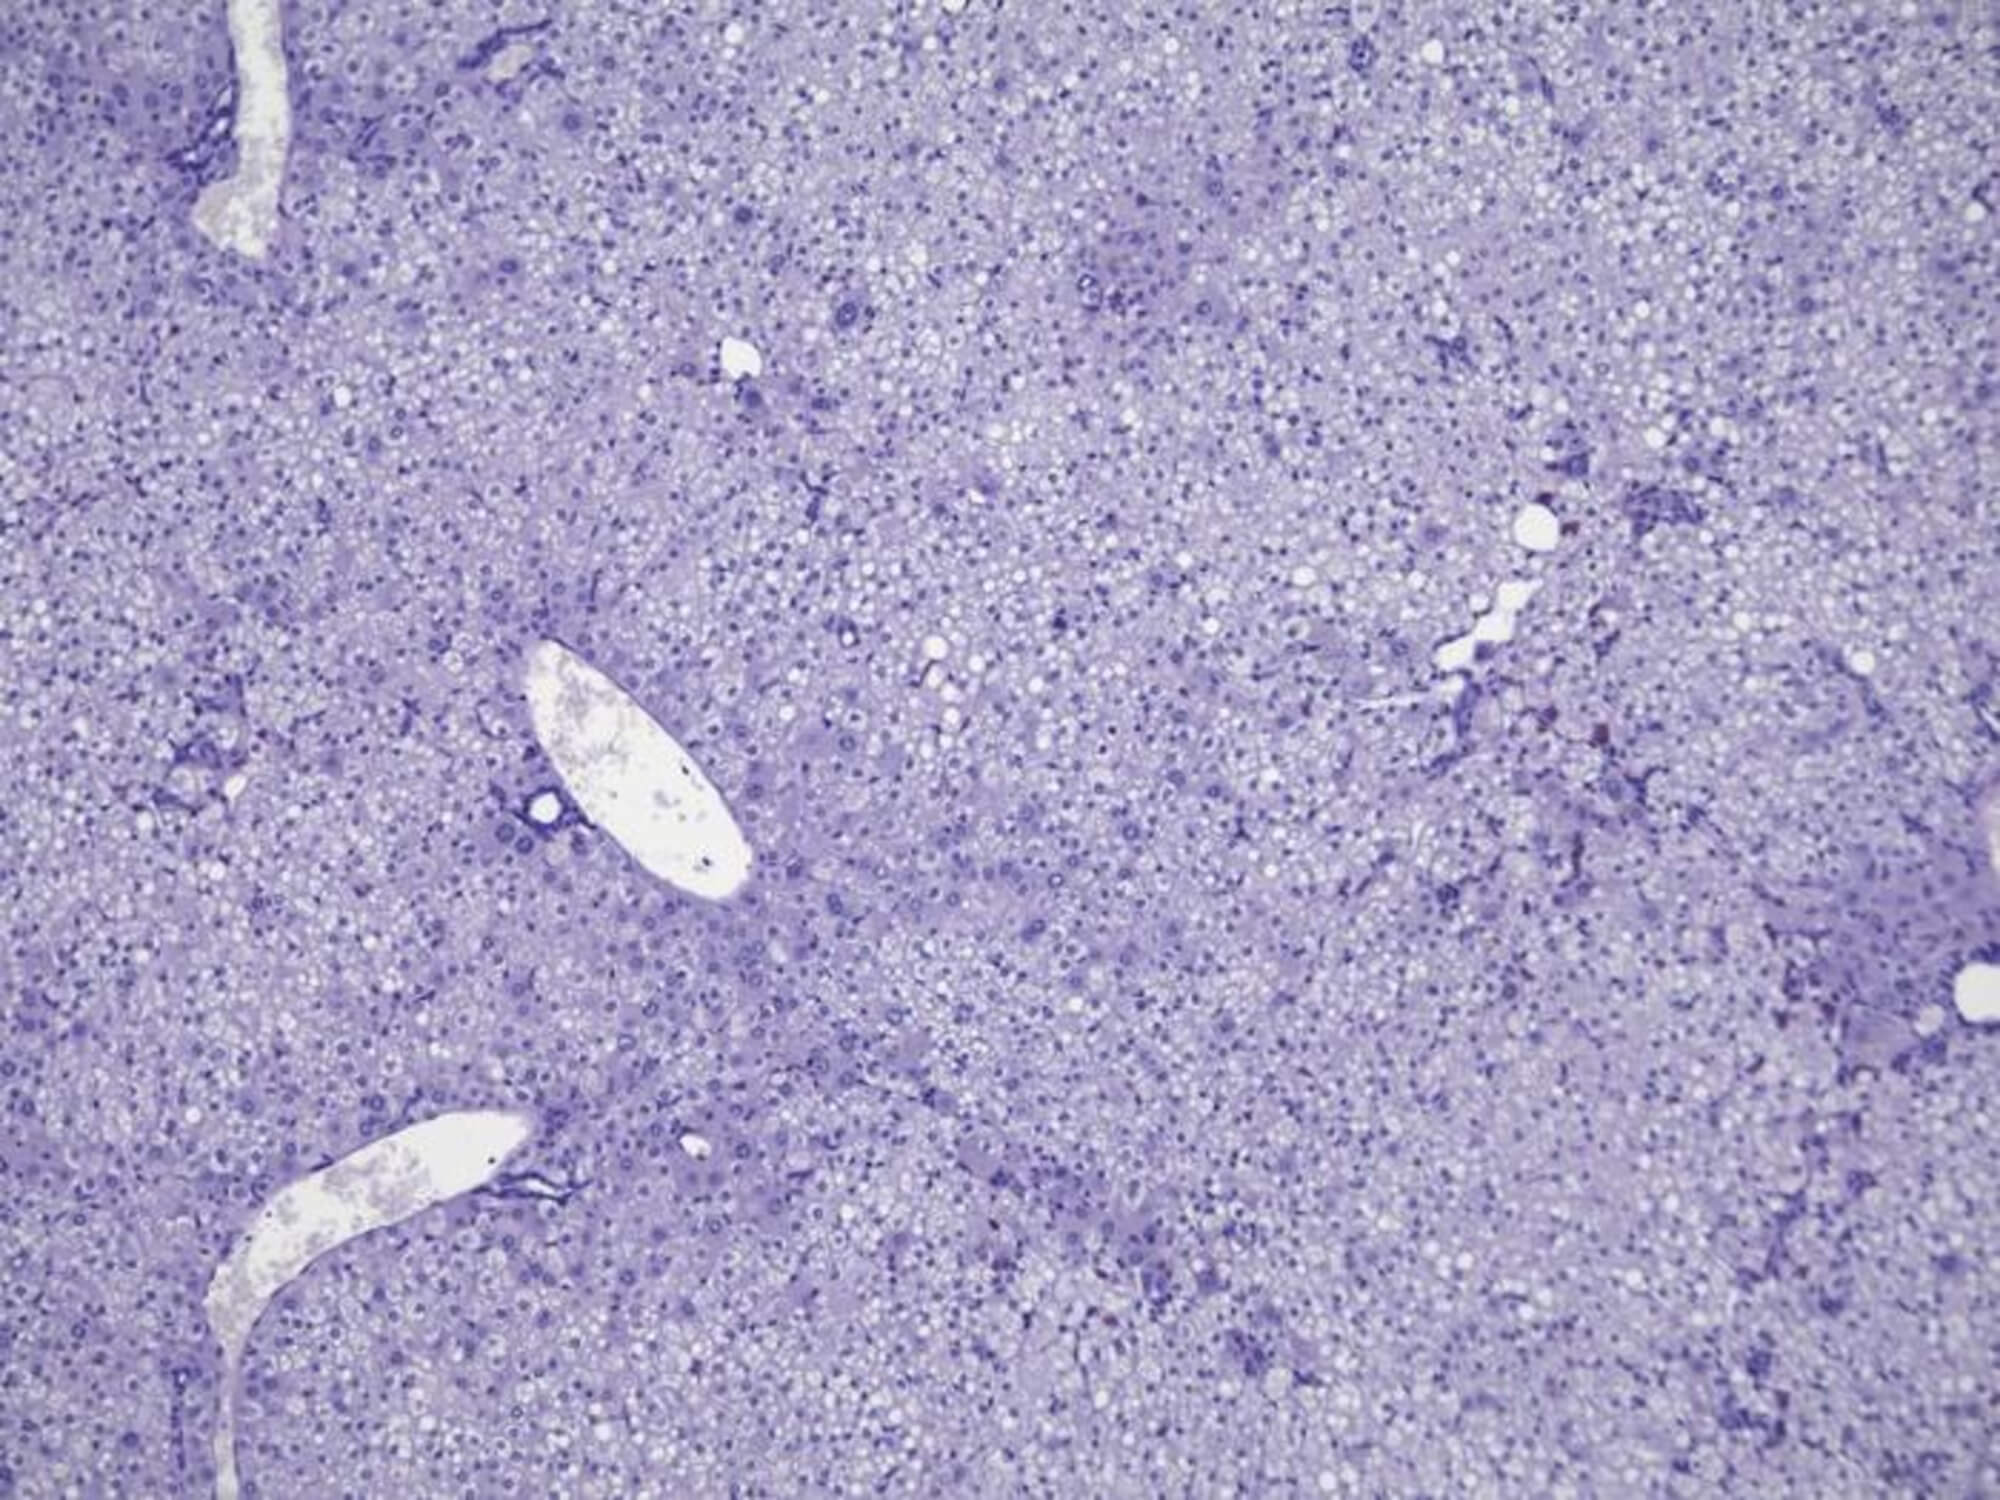 Healthy human liver cells (shown in purple) in a humanized mouse model